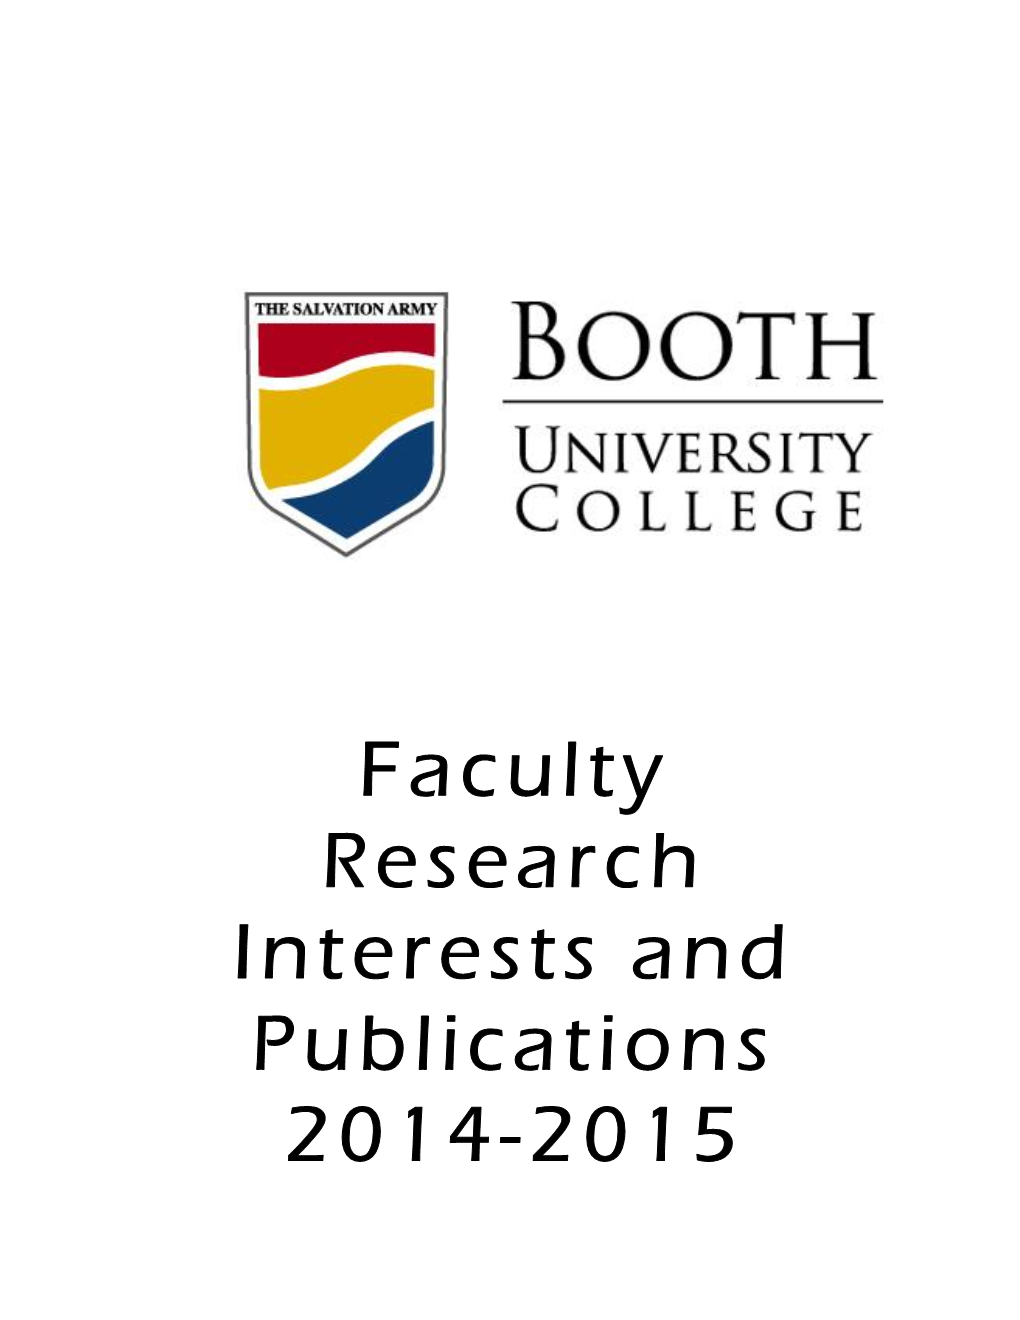 Faculty Research Interests and Publications 2014-2015 the Role of Research at Booth University College